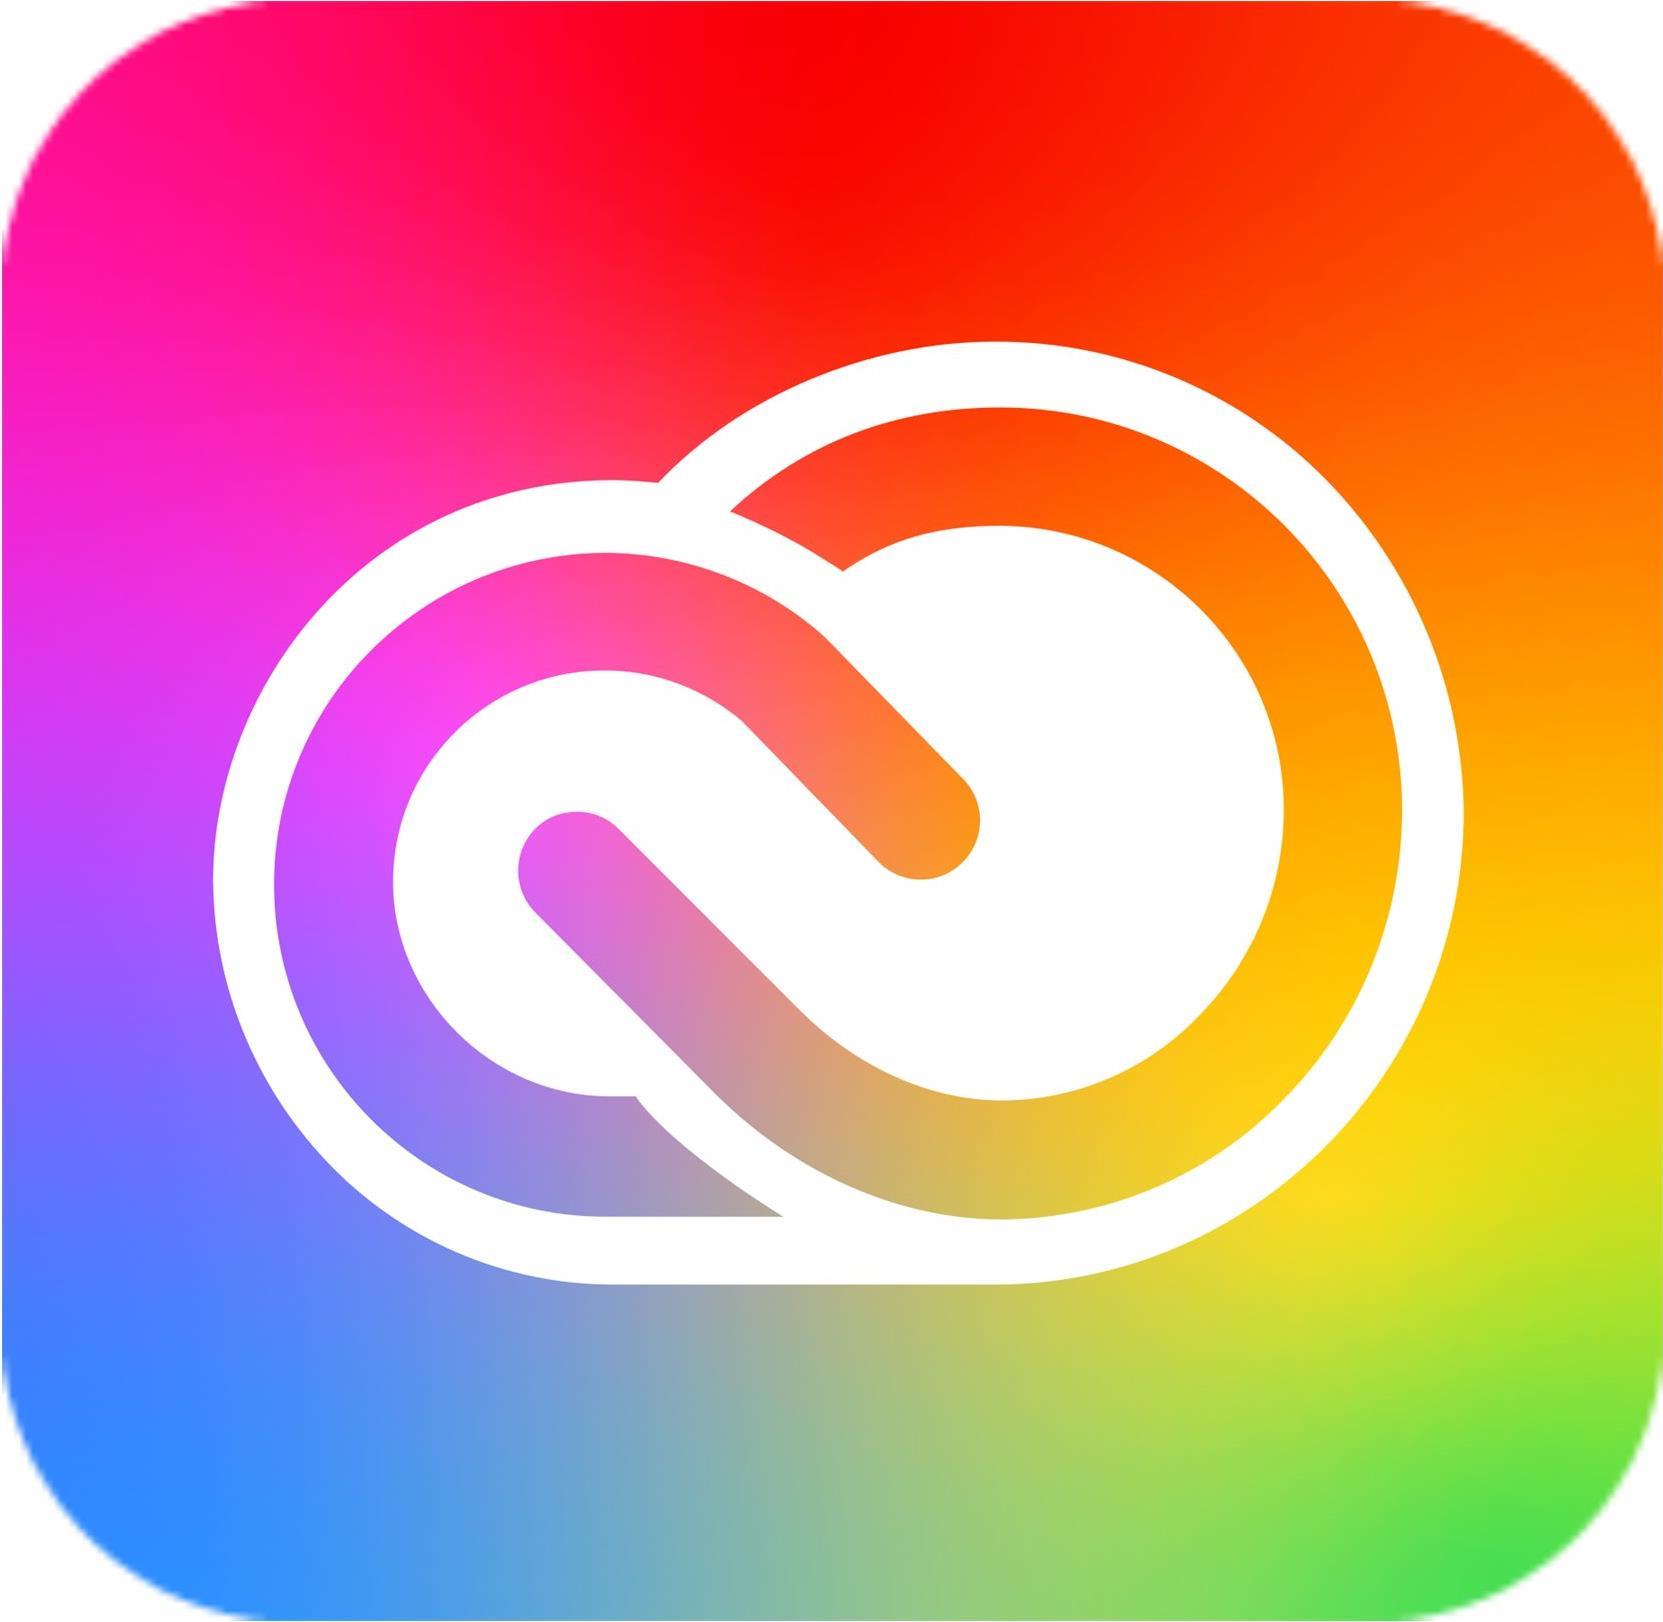 Adobe Creative Cloud for teams - All Apps - Subscription Renewal - 1 Benutzer - VIP Select - Stufe 13 (50-99) - 3 years commitment - Win, Mac - Multi European Languages von Adobe